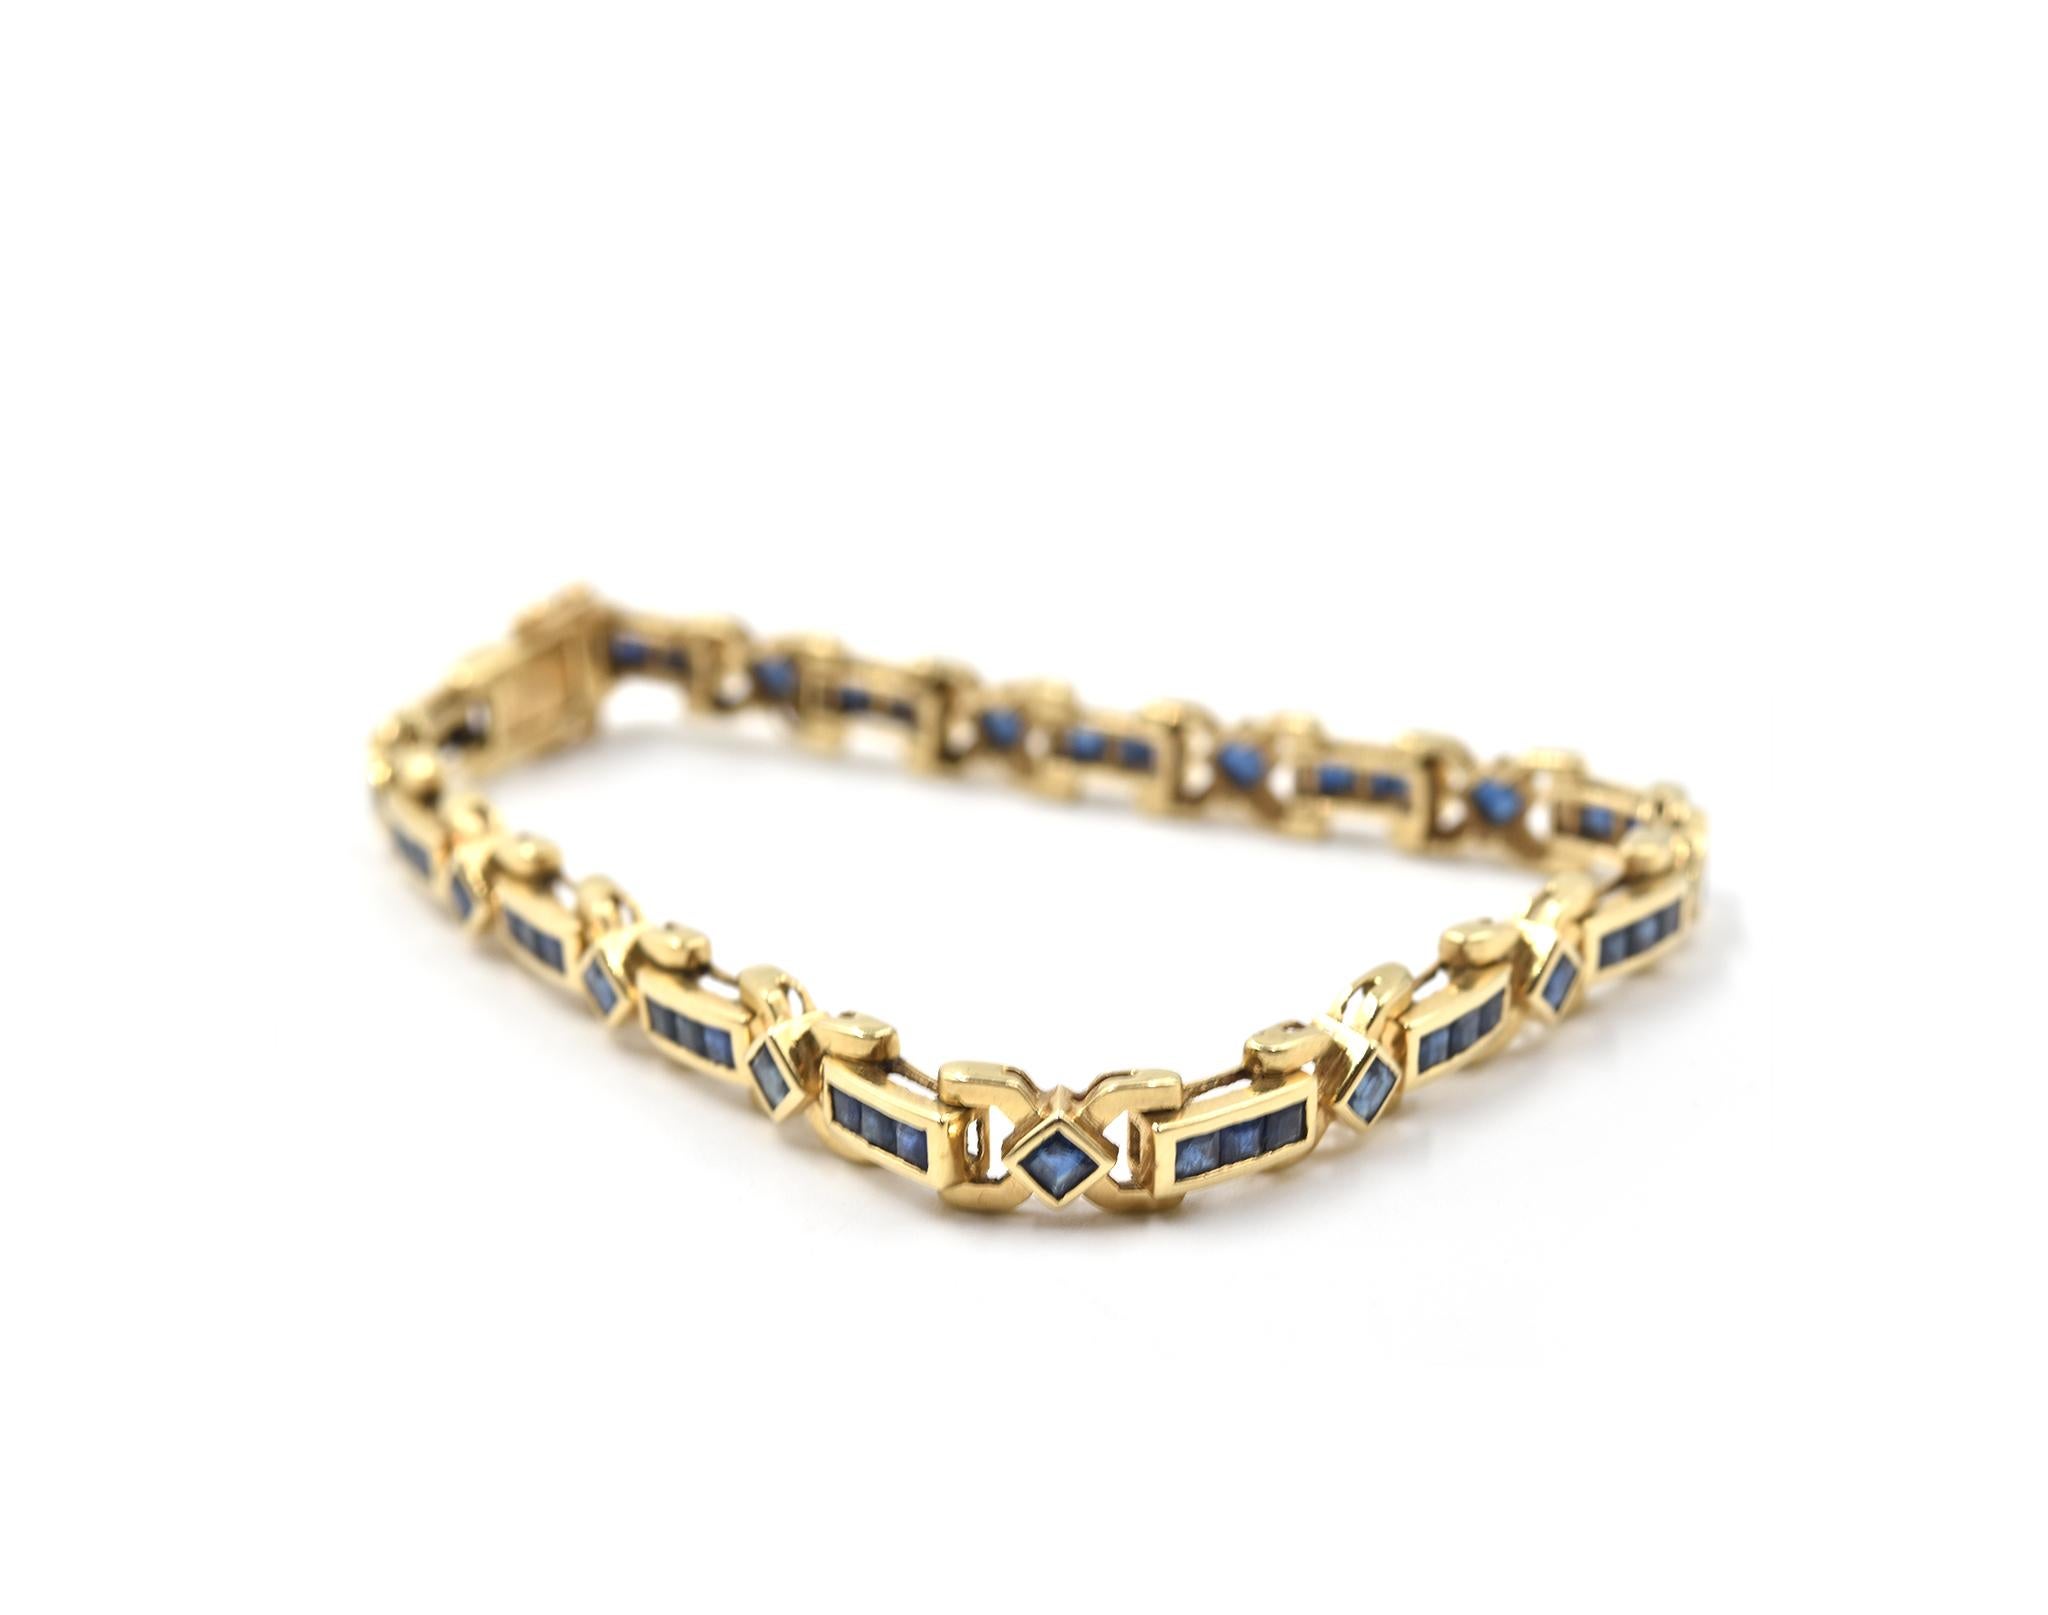 Designer: custom design
Material: 14k yellow gold
Sapphires: 52 square cut = 3.64 carat weight
Dimensions: bracelet is 7 1/2-inch long
Weight: 15.1 grams
